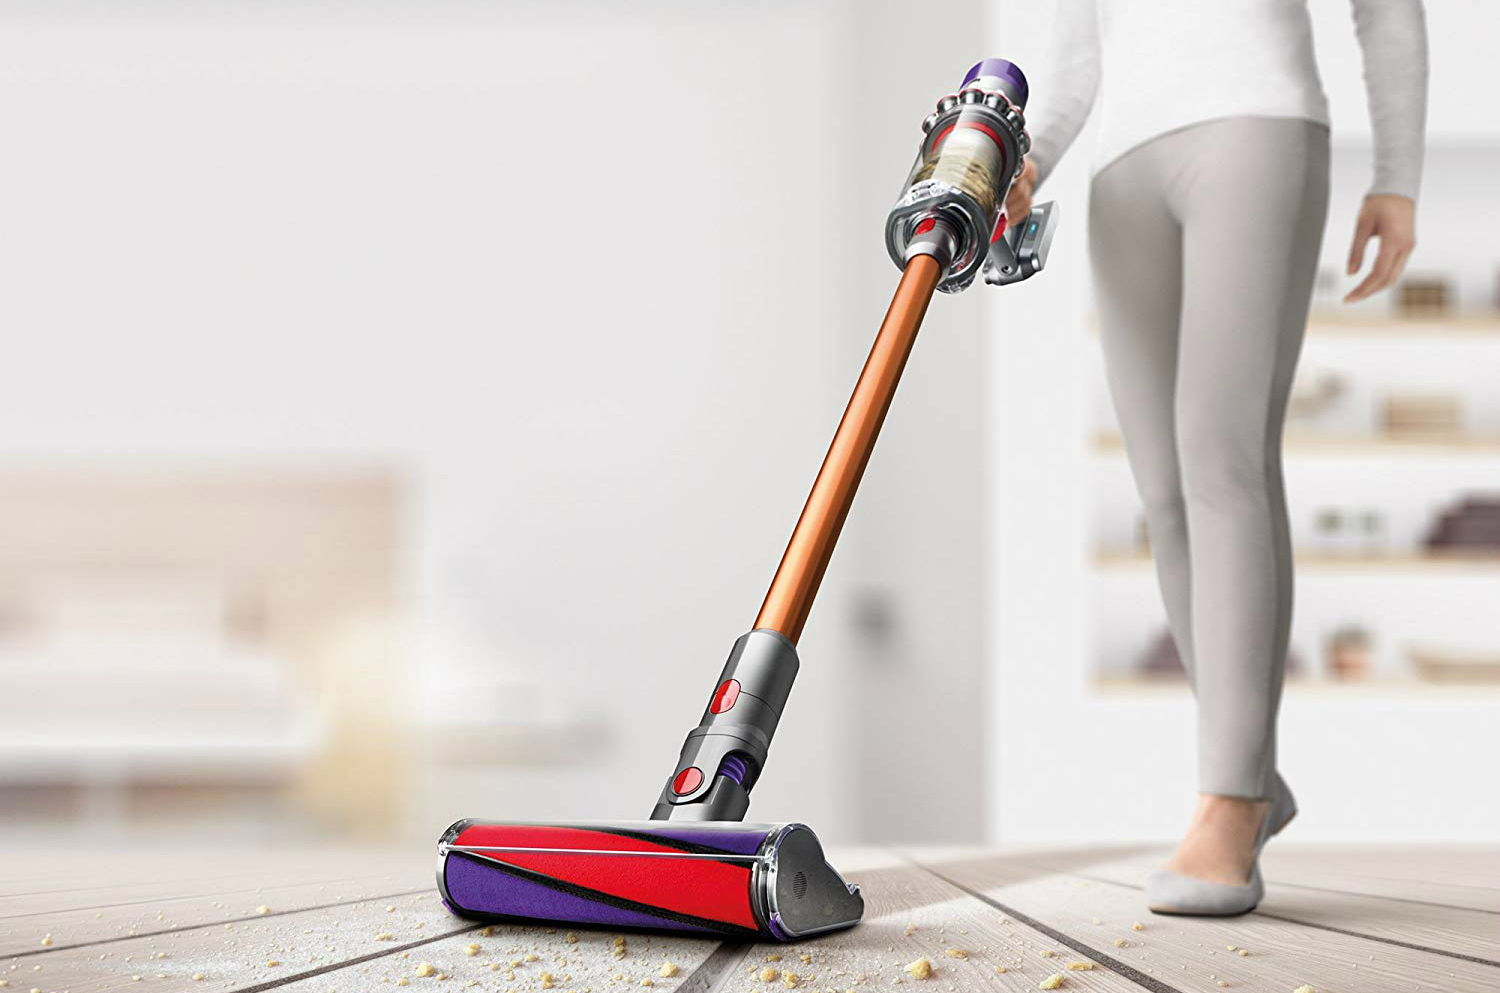 dyson vacuum cleaner deals on amazon cyclone v10 absolute lightweight cordless stick 2